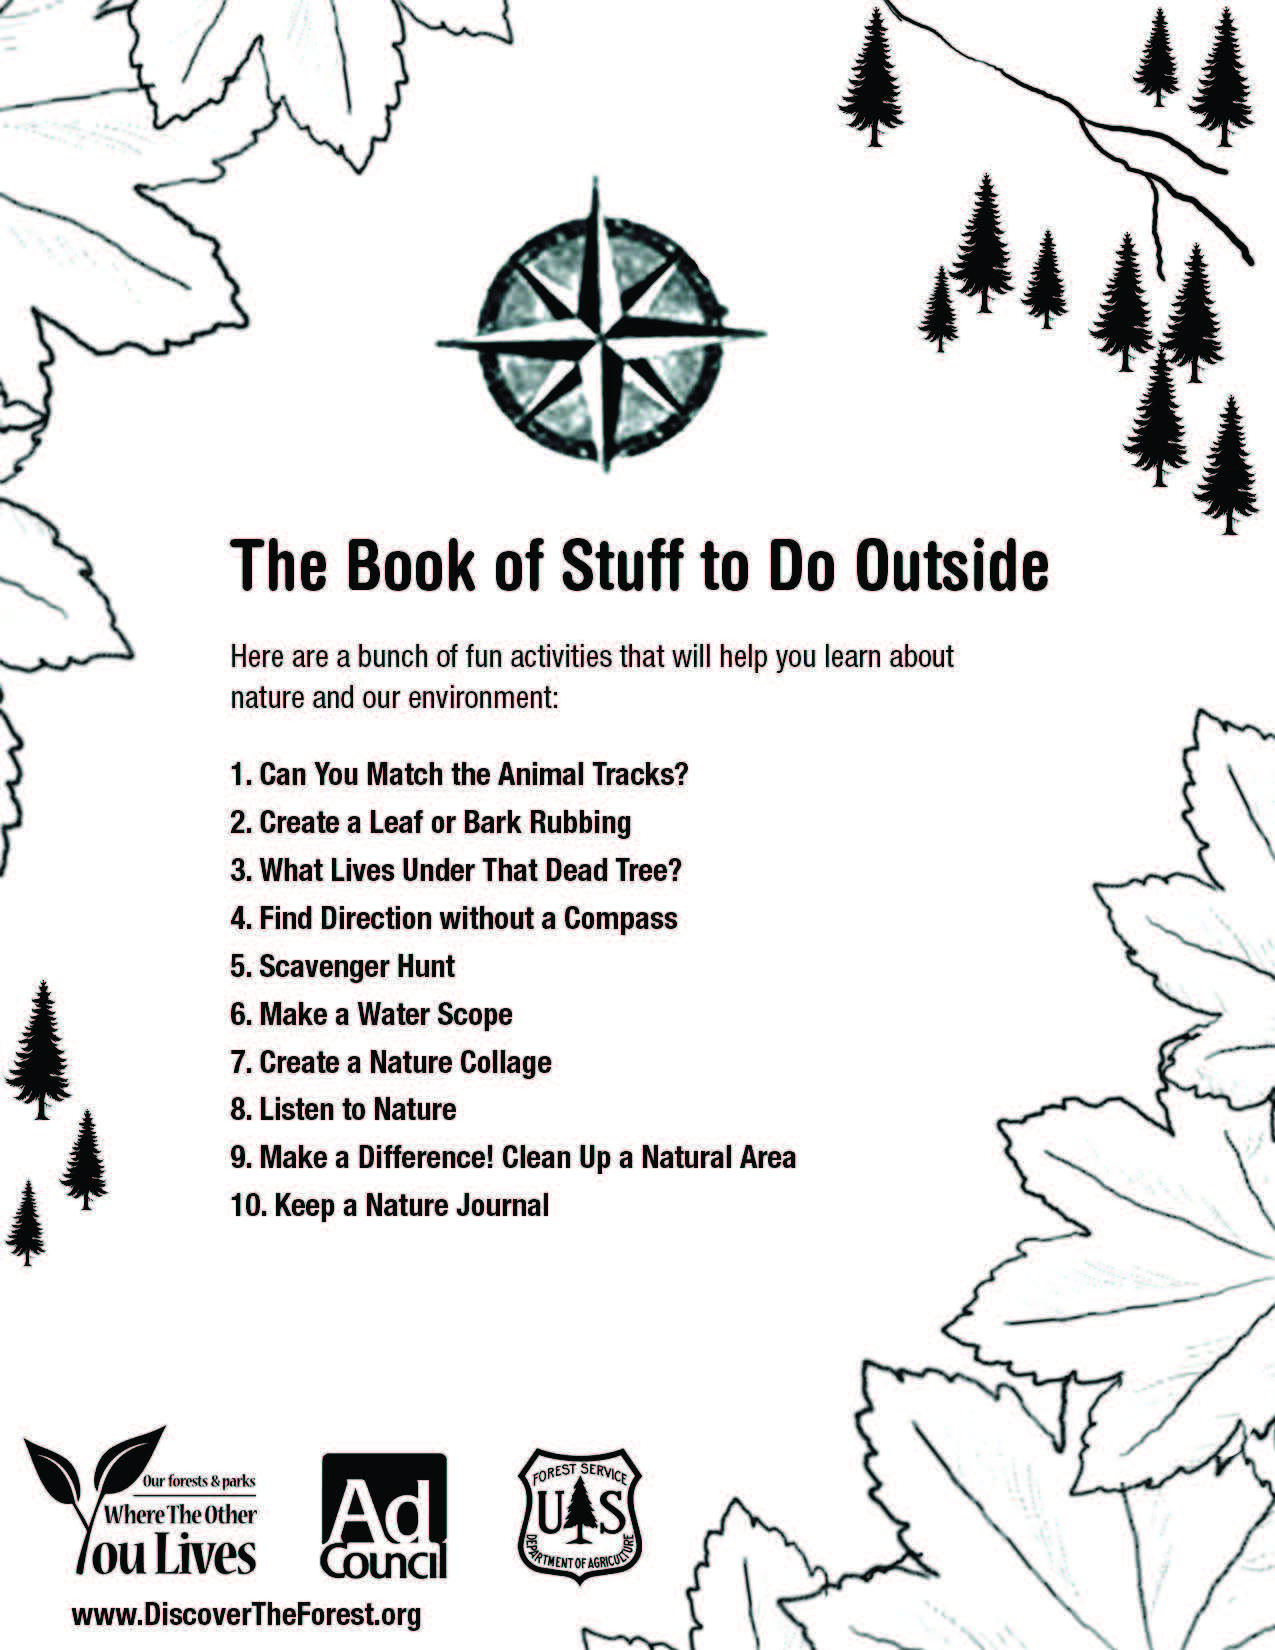 Cover of the Book of Stuff to do Outside - Discover the Forest